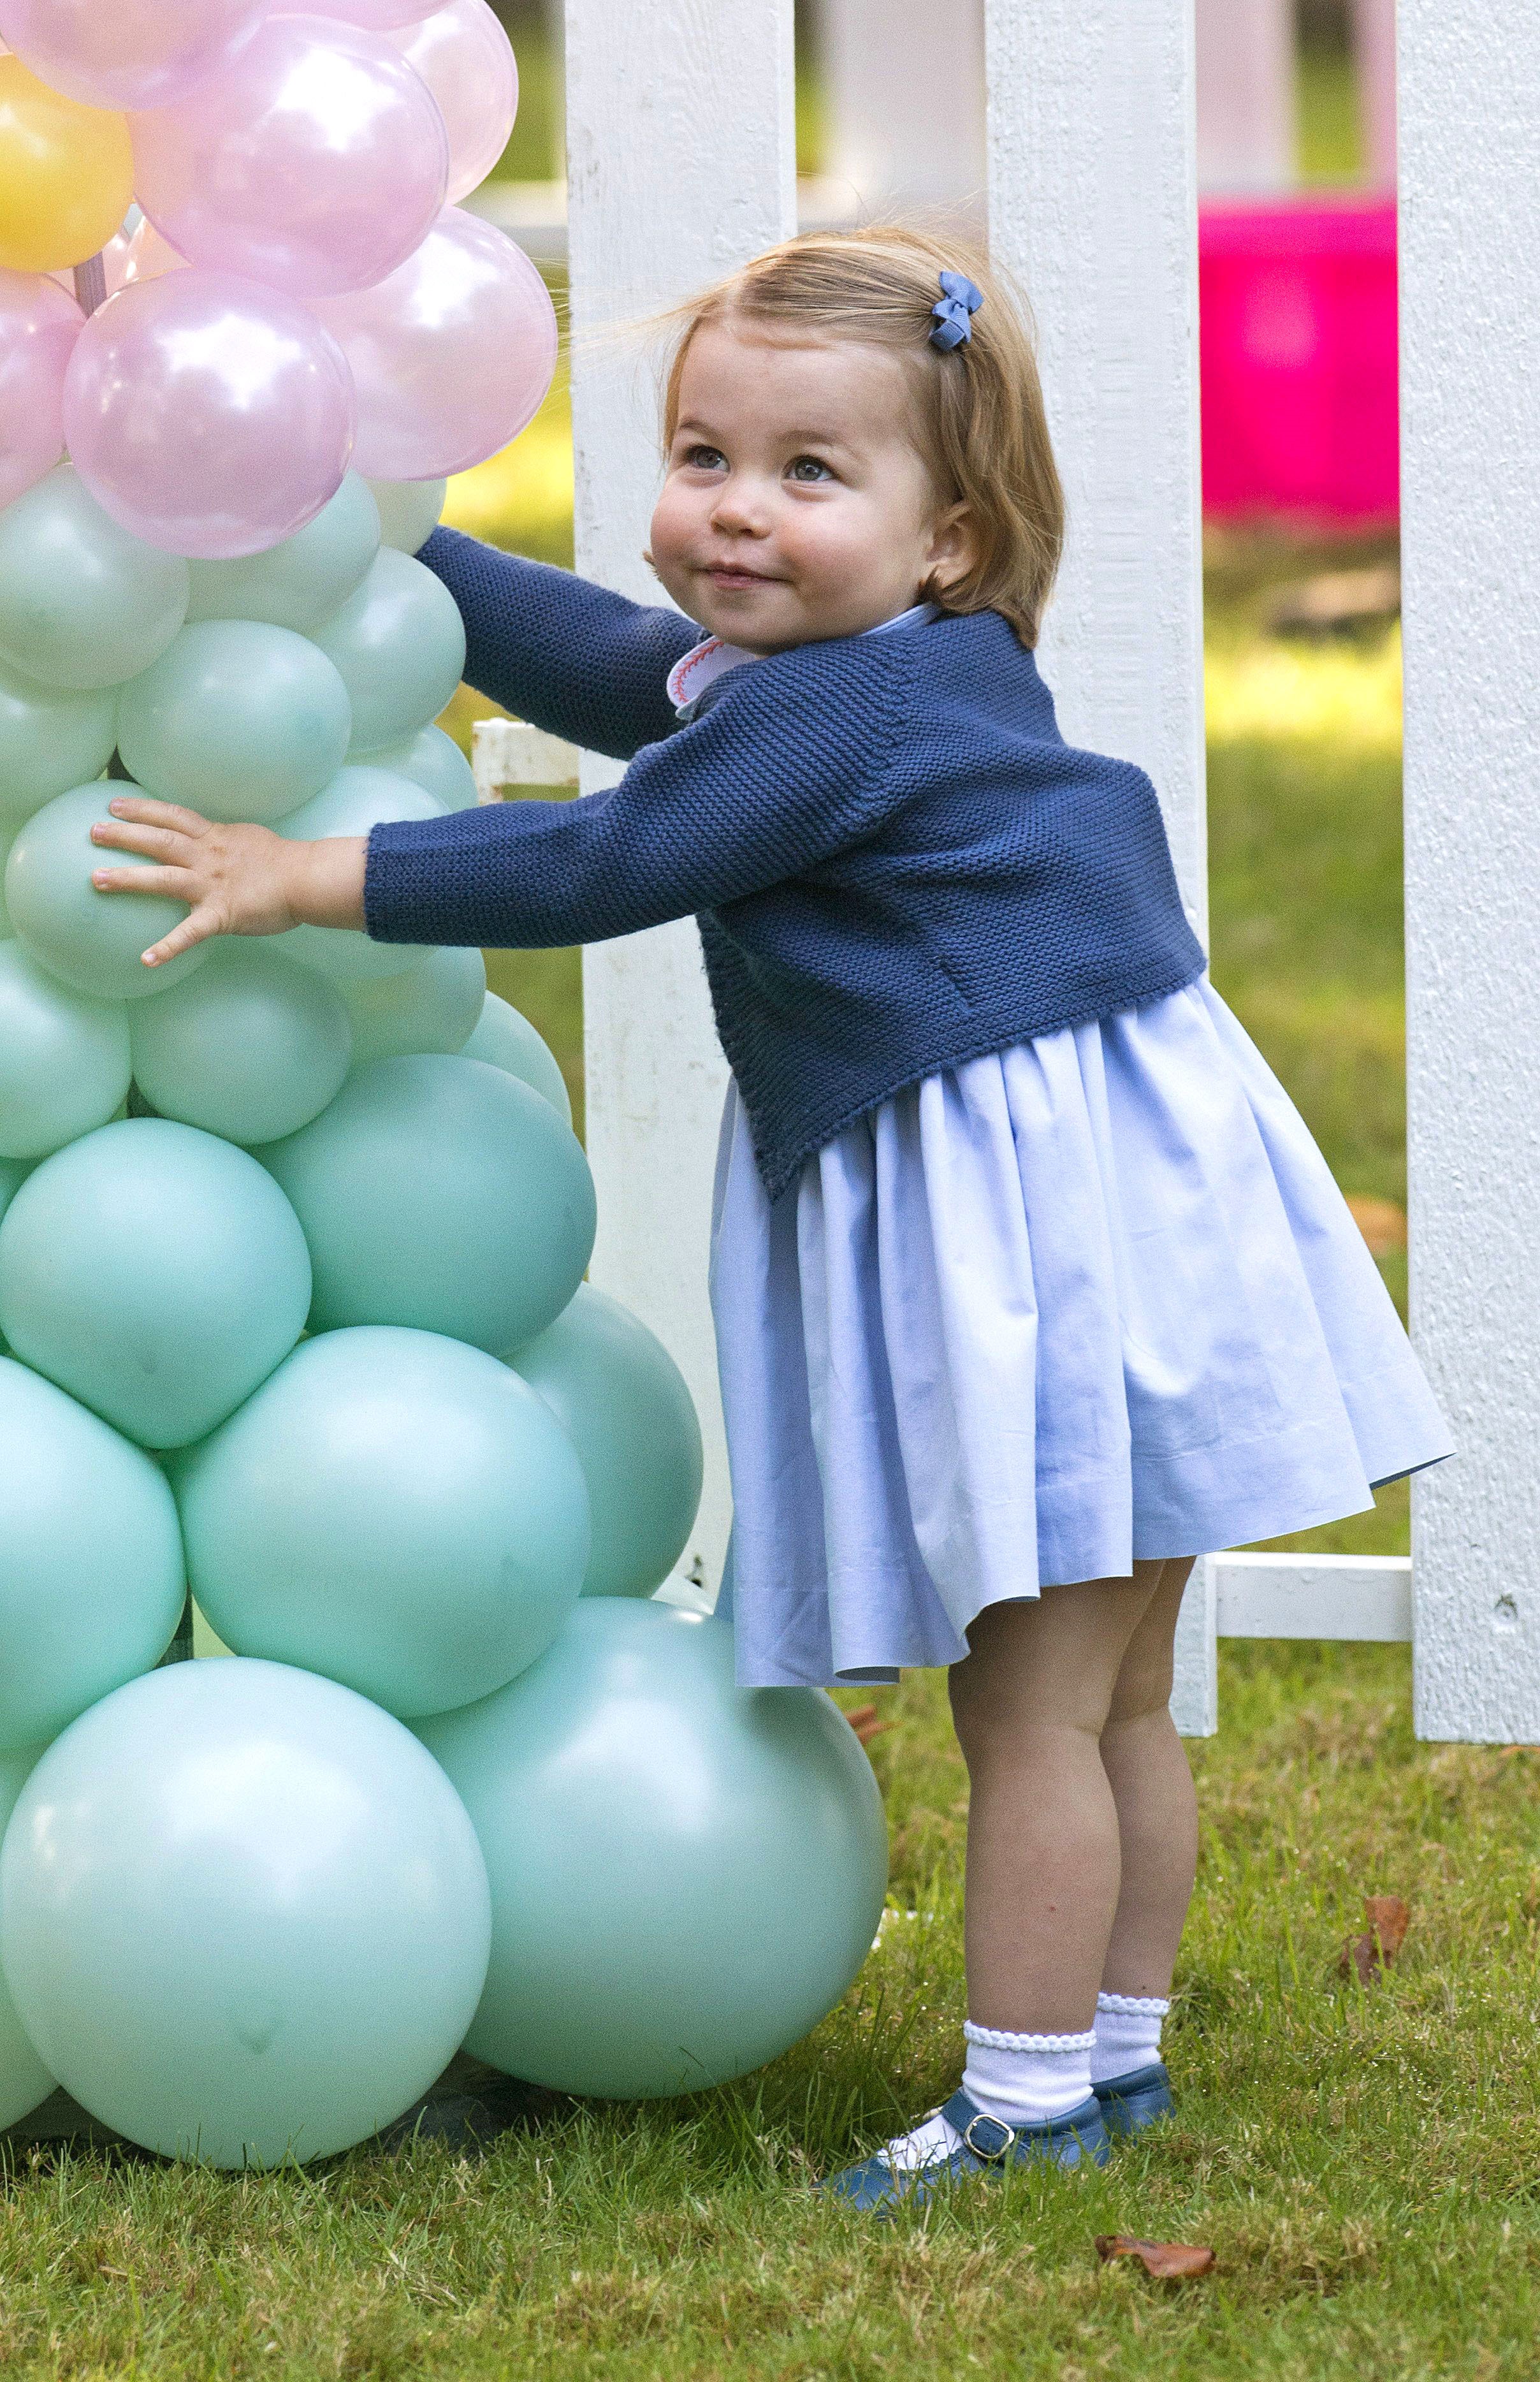 Mandatory Credit: Photo by Francis Dias/NEWSPIX/REX/Shutterstock (6047577ax) Princess Charlotte at a children's party for military families, Government House, Victoria, British Columbia The Duke and Duchess of Cambridge visit Canada - 29 Sep 2016 Royals attend children's party for military families, Government House, Victoria WEARING MI LUCERO cardigan UFO Mary Jane shoes, bow by Amaia Kids, smocked dress by Pepa & Co